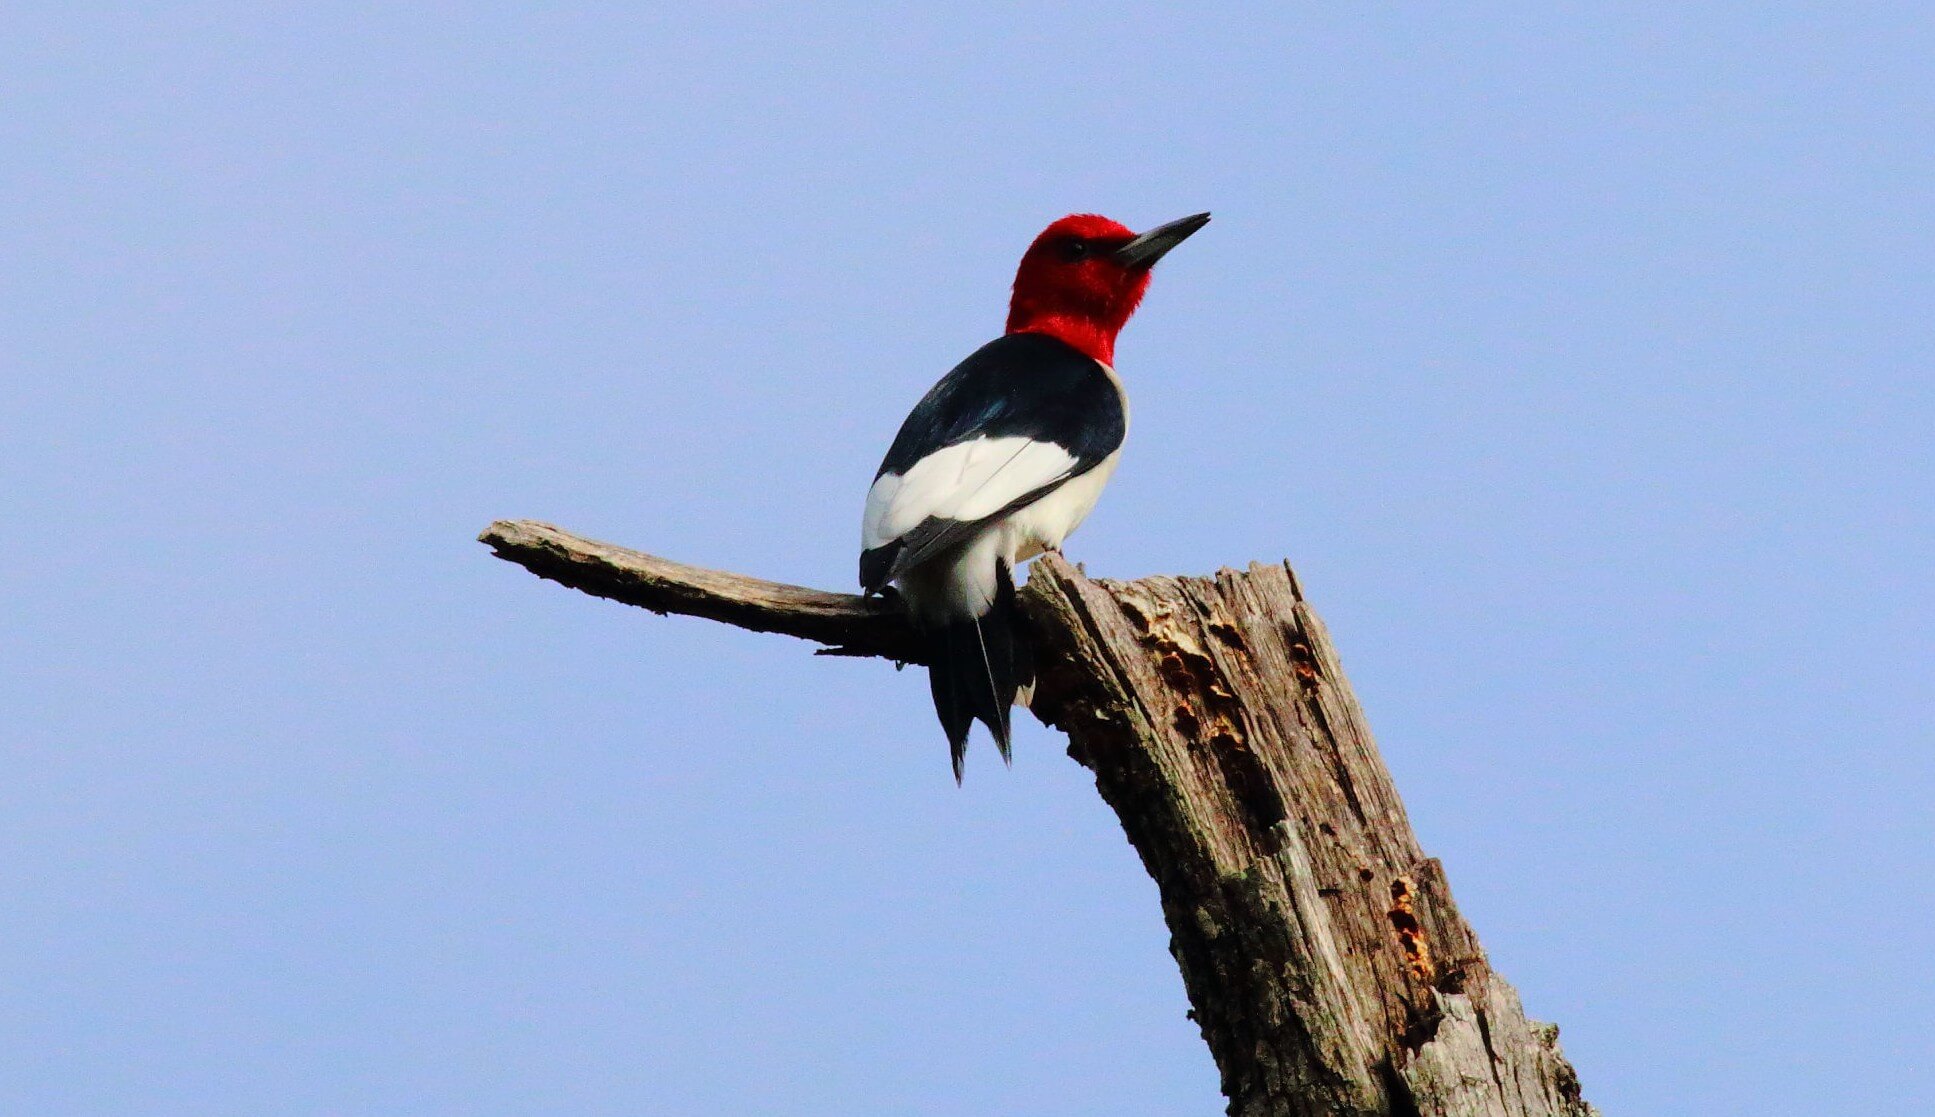 A Red-Headed Woodpecker in southern Missouri. Photo by Bruce Beehler